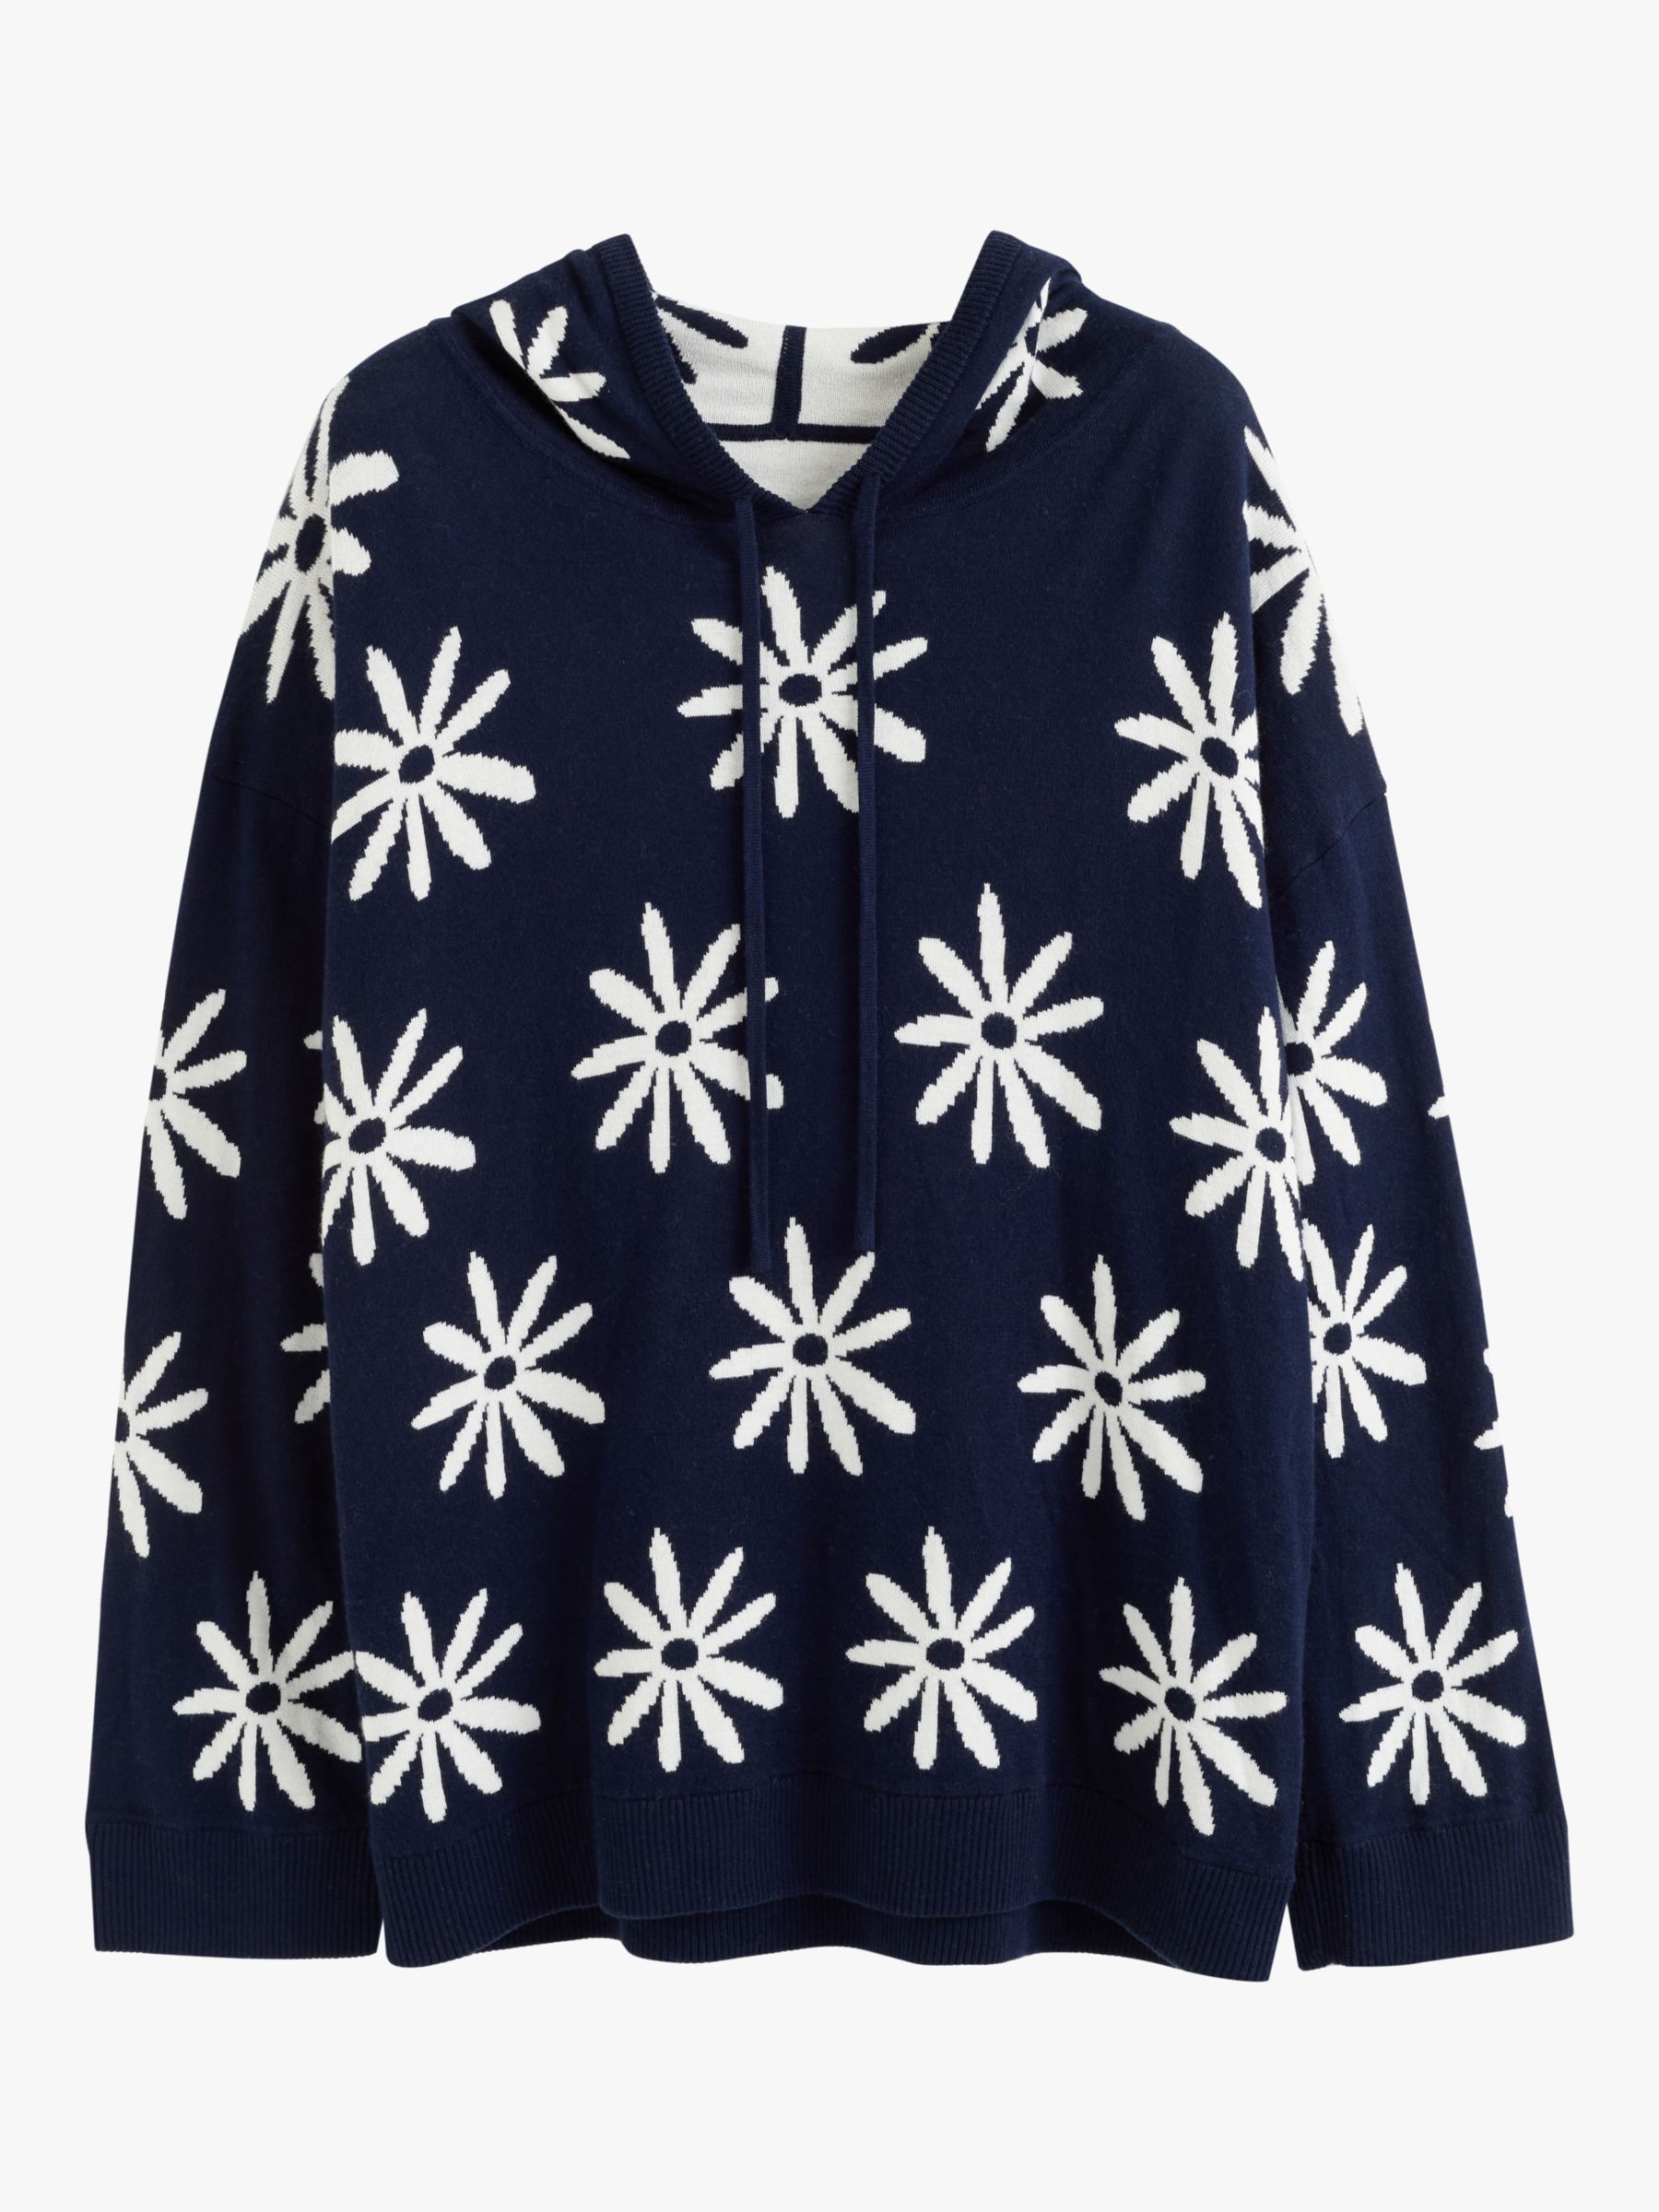 Chinti & Parker Ditsy Daisy Cashmere Blend Hoodie, Deep Navy/Multi, XL